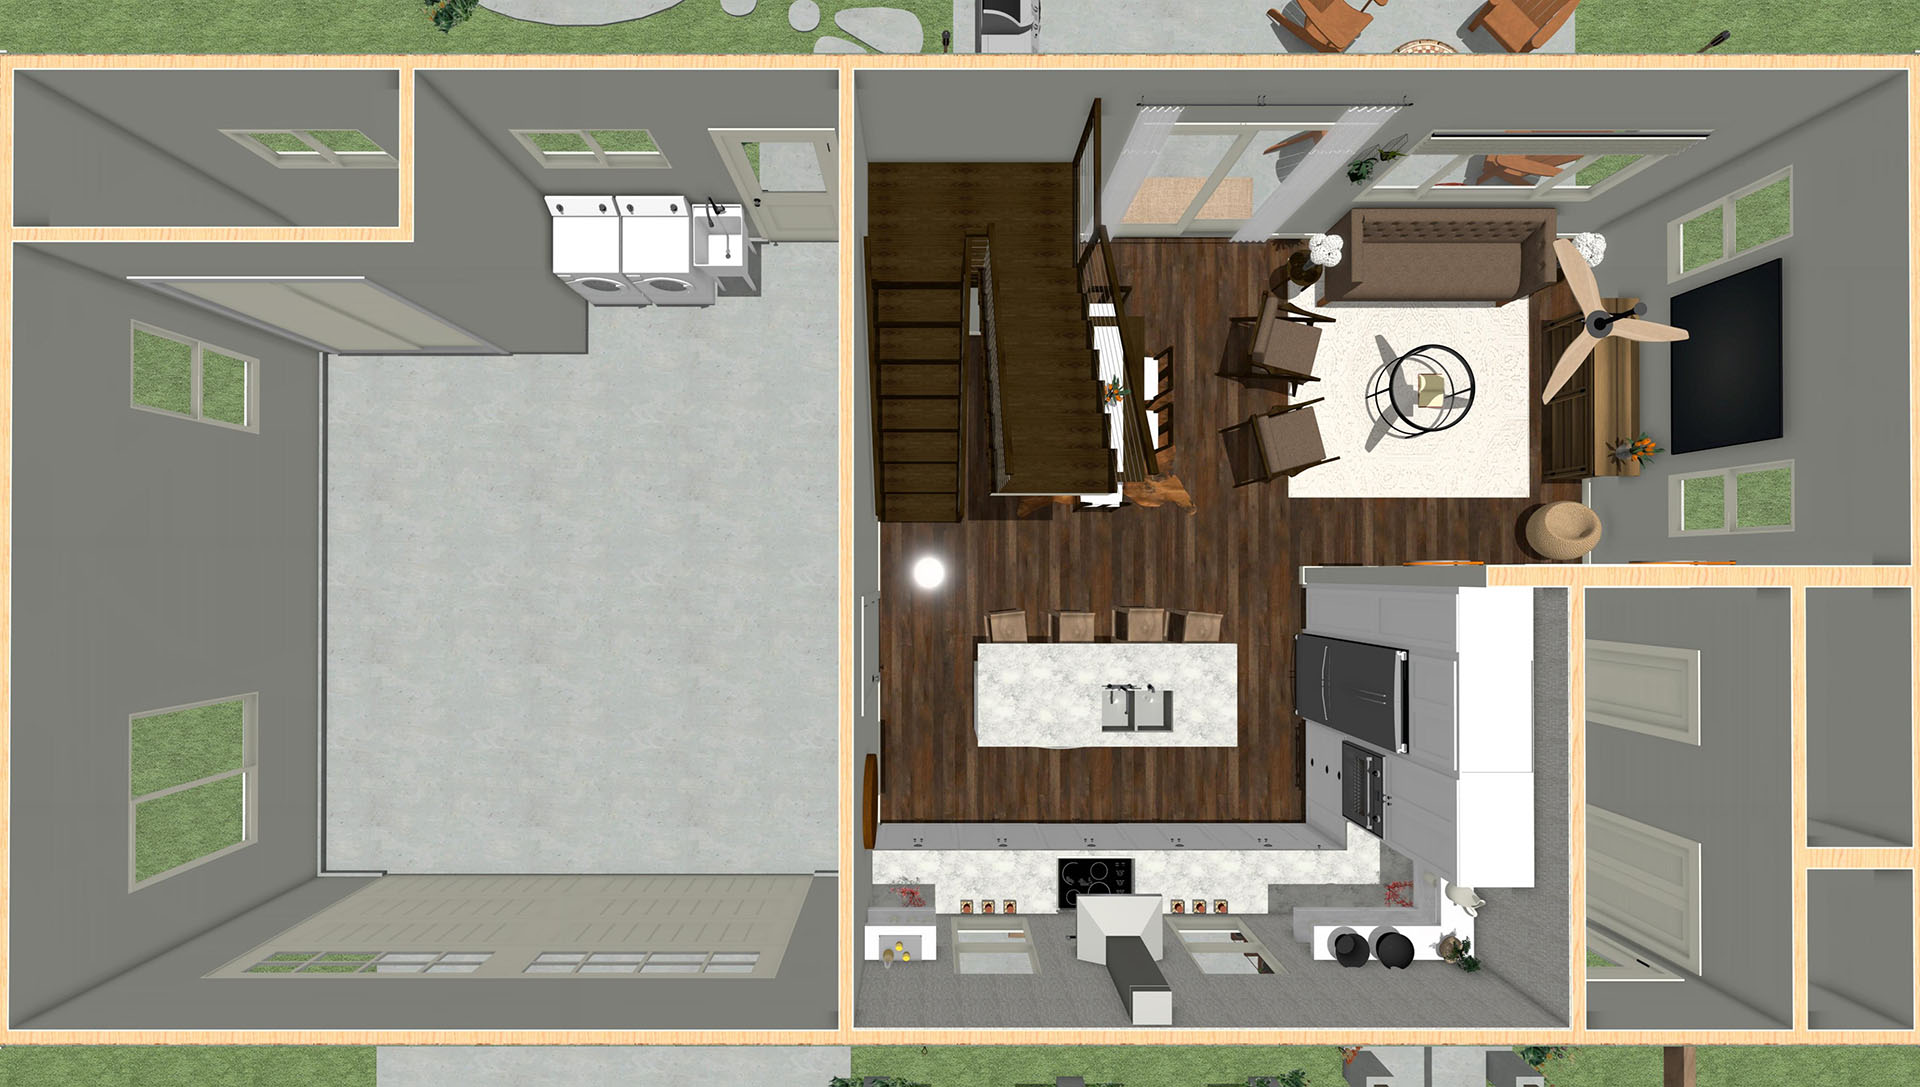 Aerial view of a house's downstairs area and garage